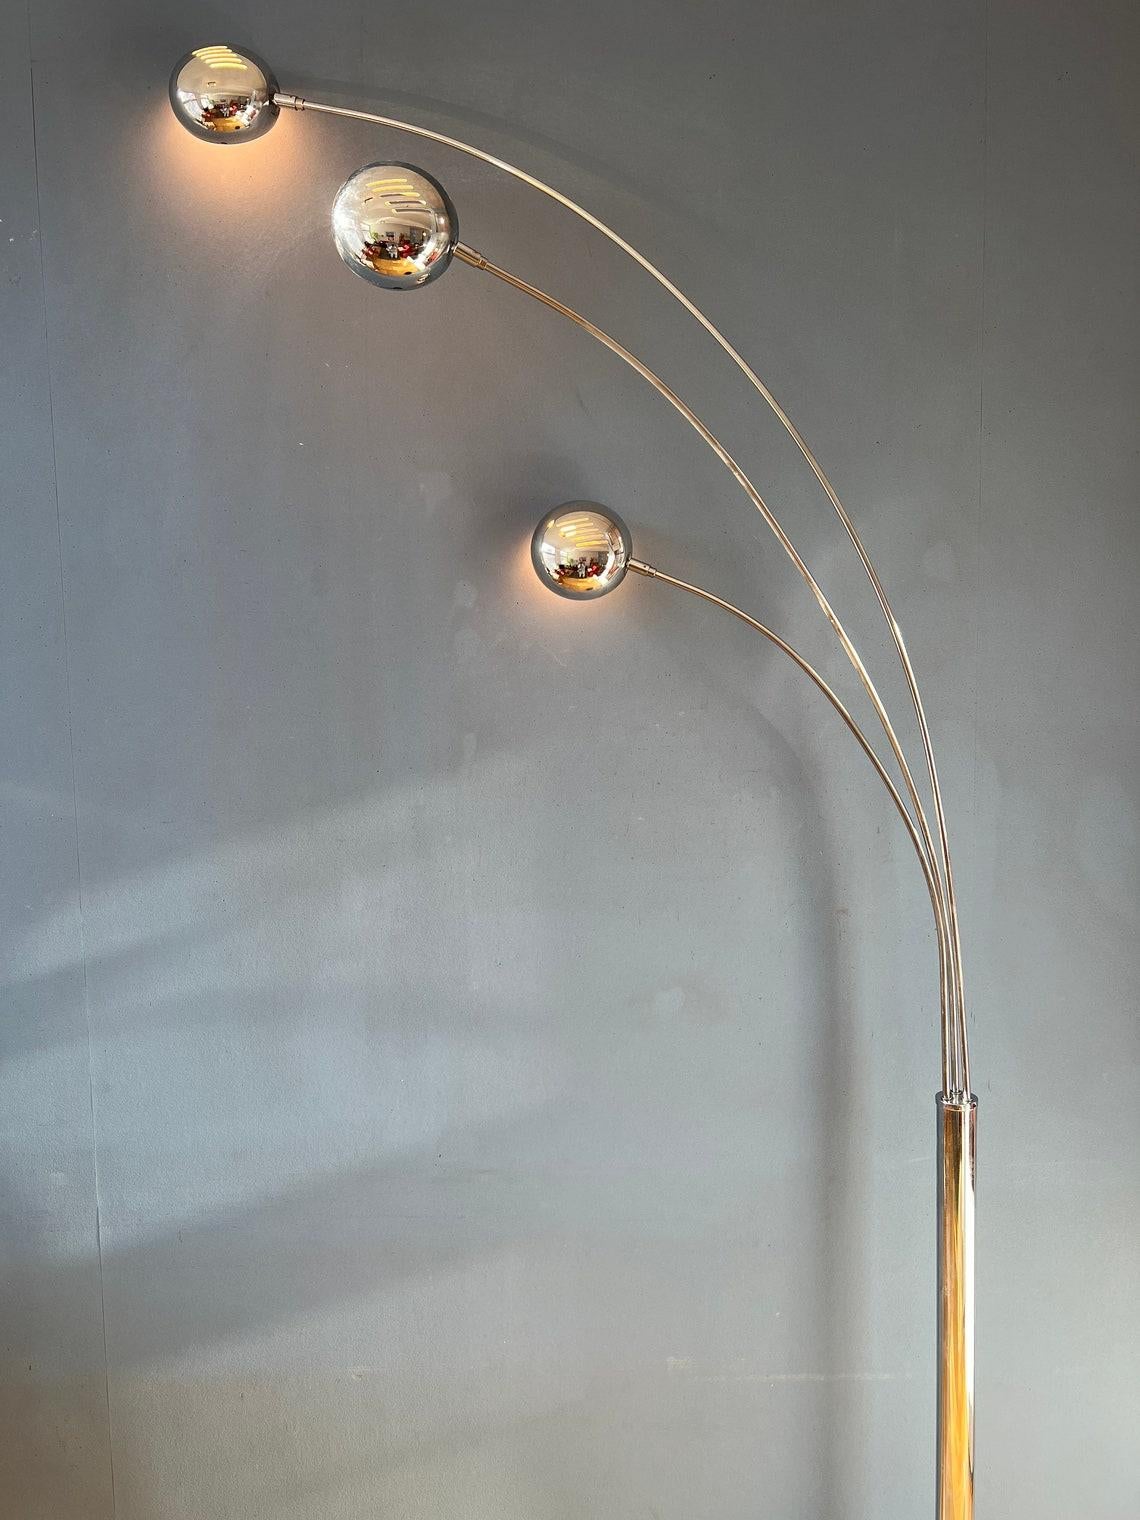 Chrome 'three finger' arc floor lamp made in the 80s. The arcs are flexible and can be aligned or positioned in opposite direction. Also the shades can be adjusted. The lamp requires three E27/26 lightbulbs (one for each shade) and currently has an